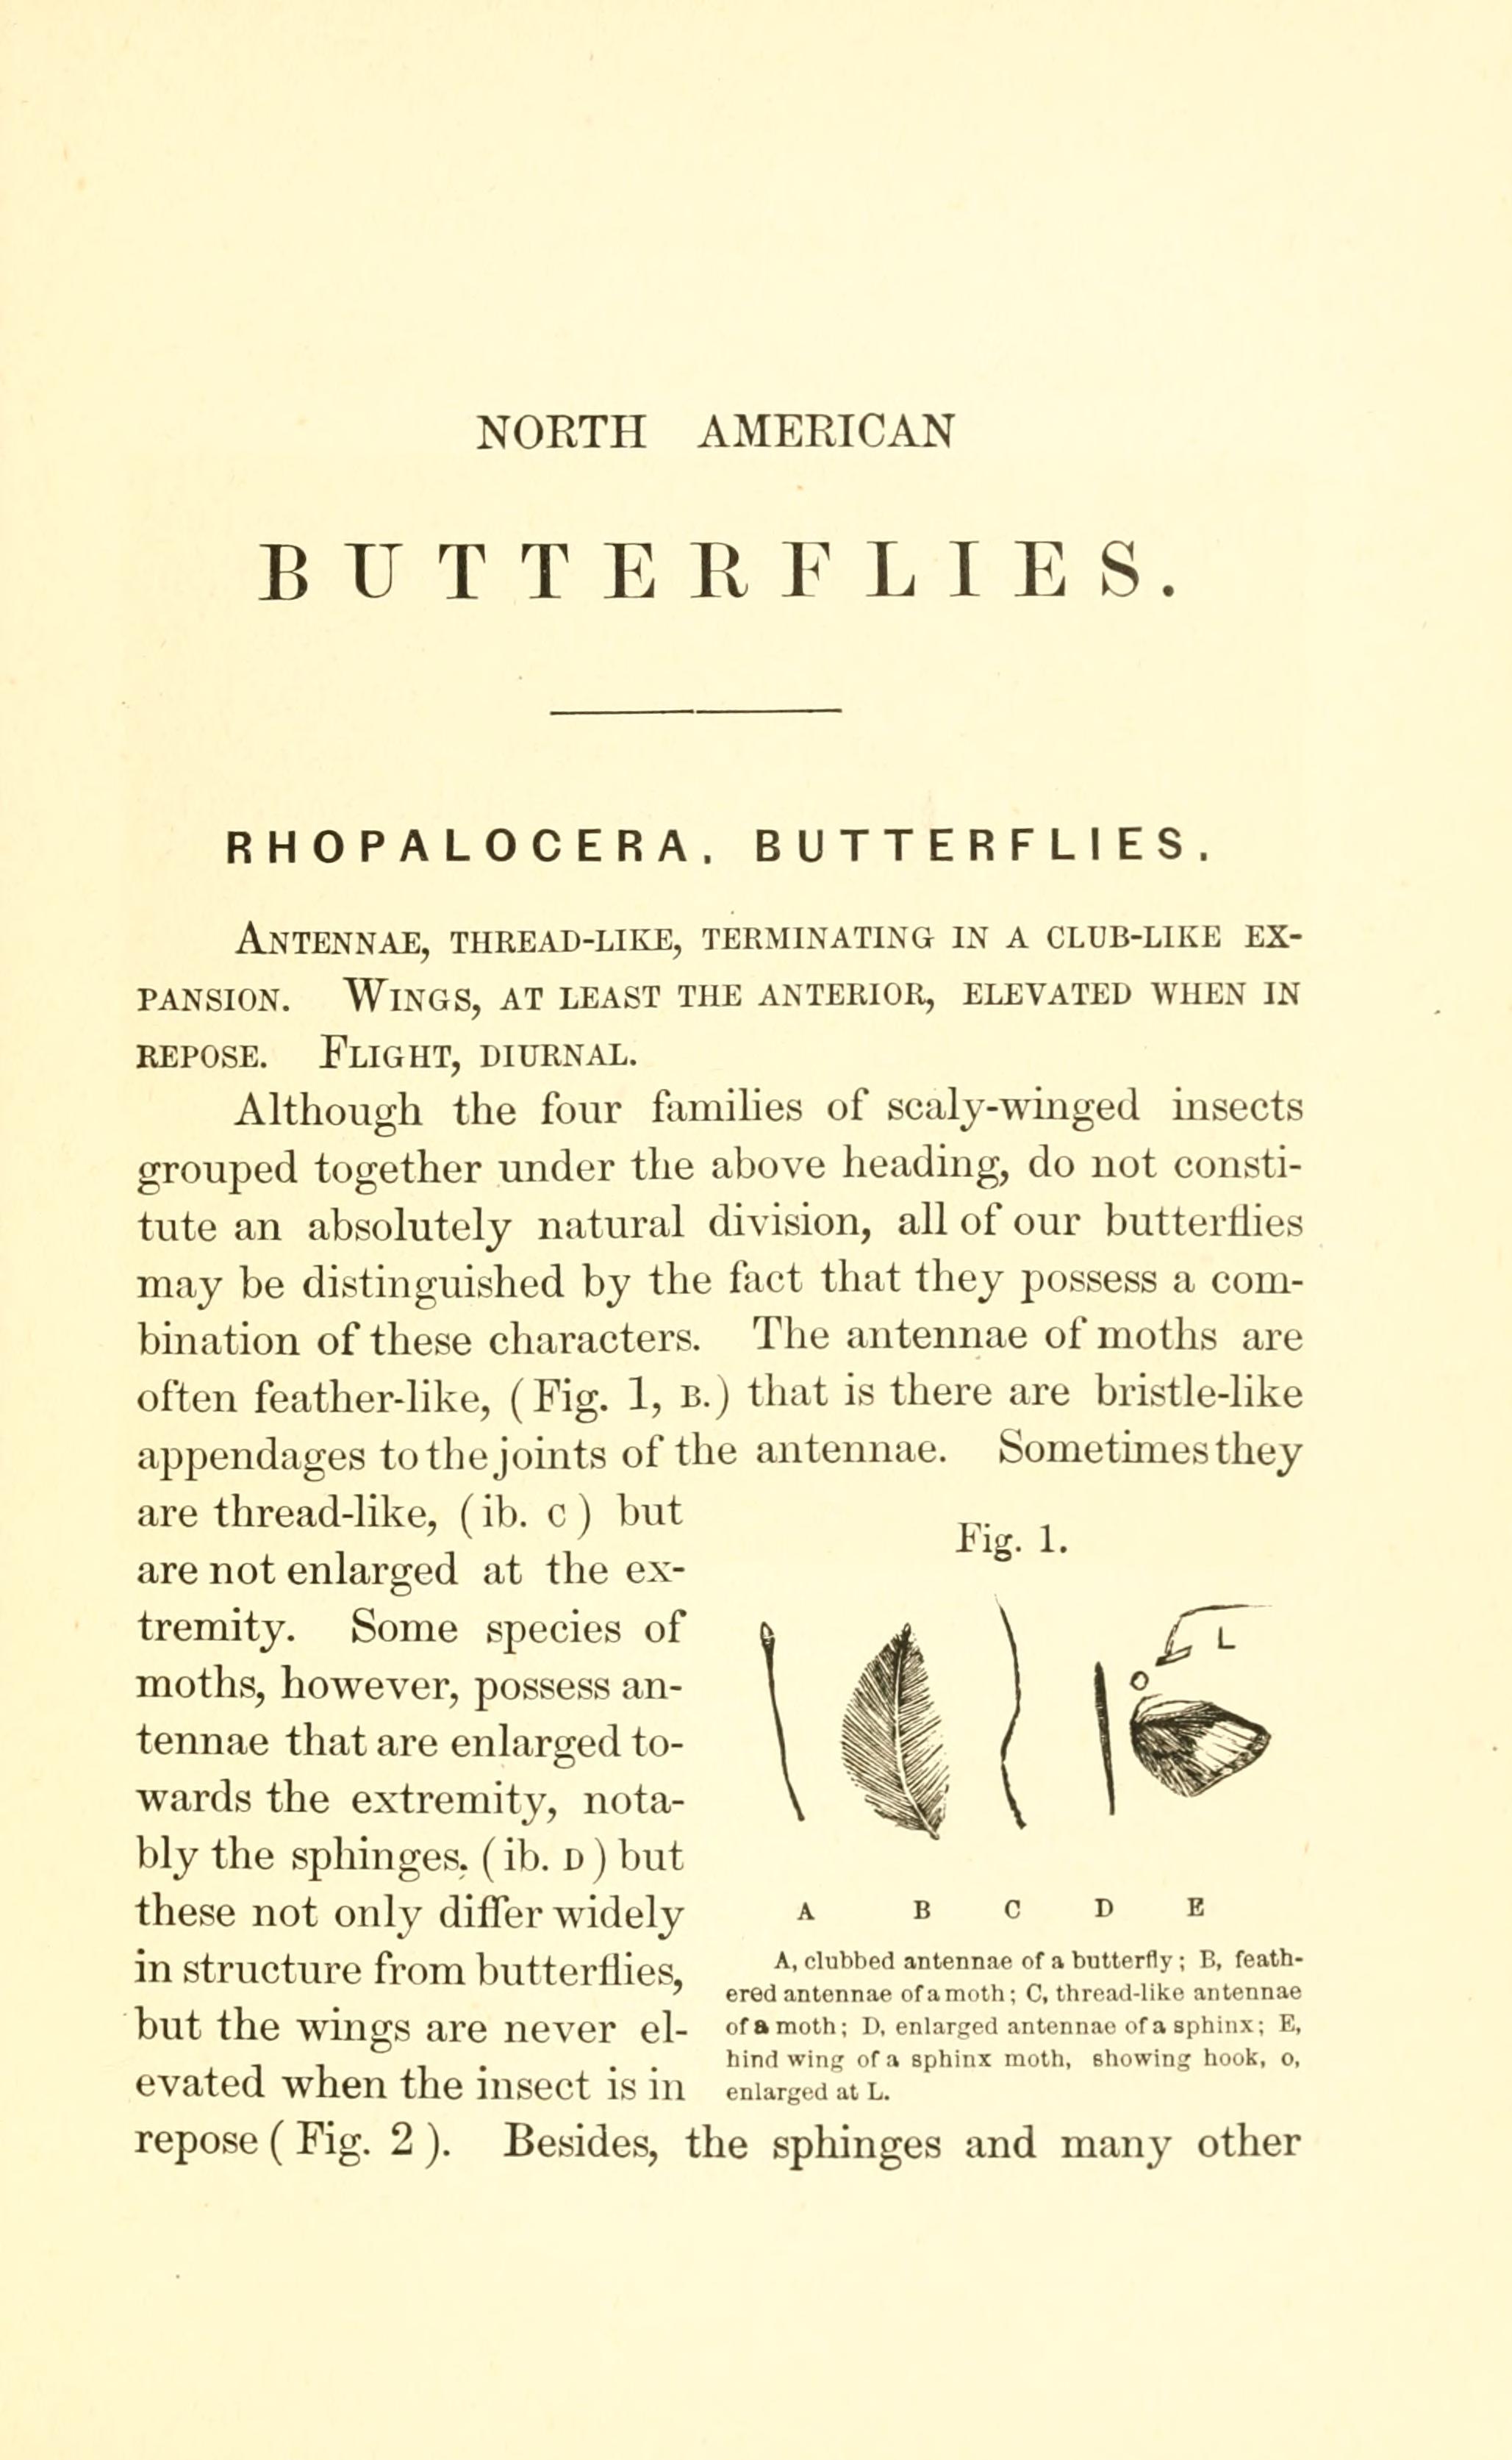 file-a-manual-of-north-american-butterflies-page-1-fig-1-bhl7500899